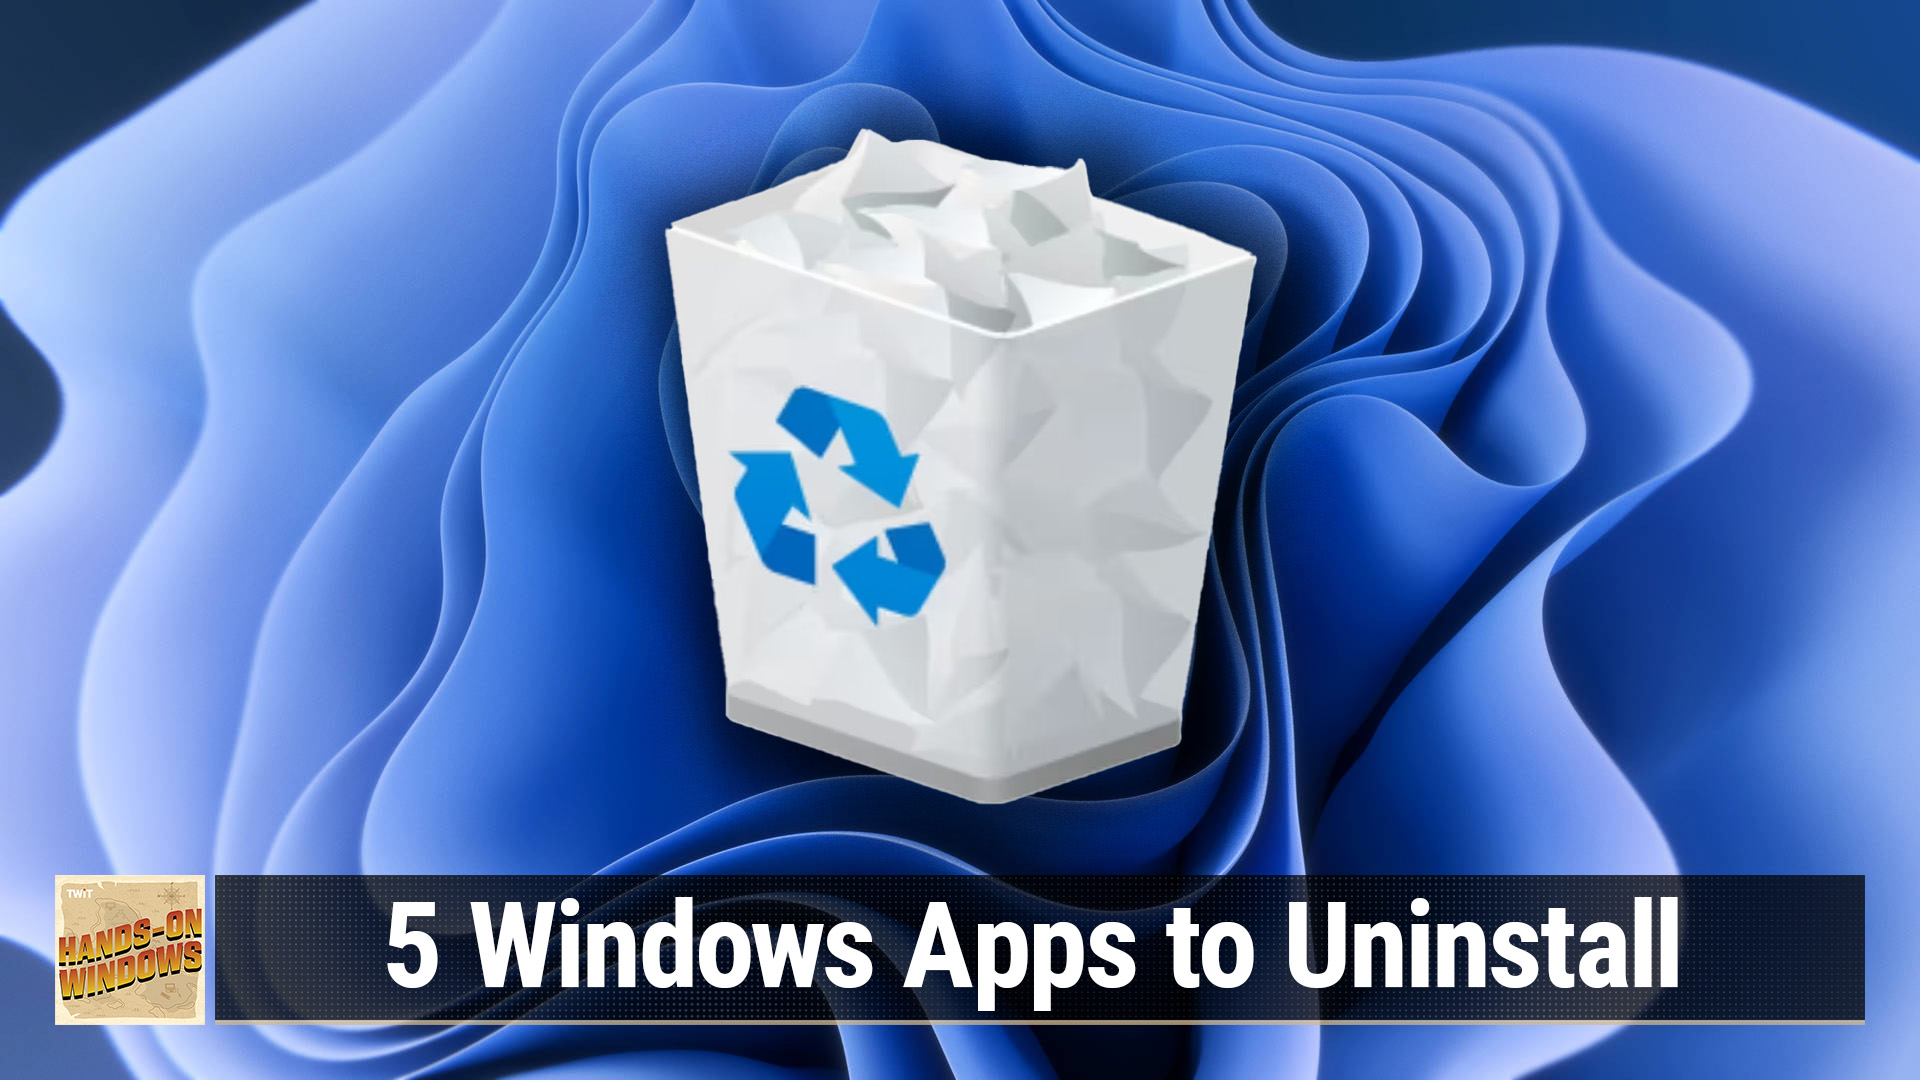 5 Windows Apps to Uninstall (Hands-On Windows #87)